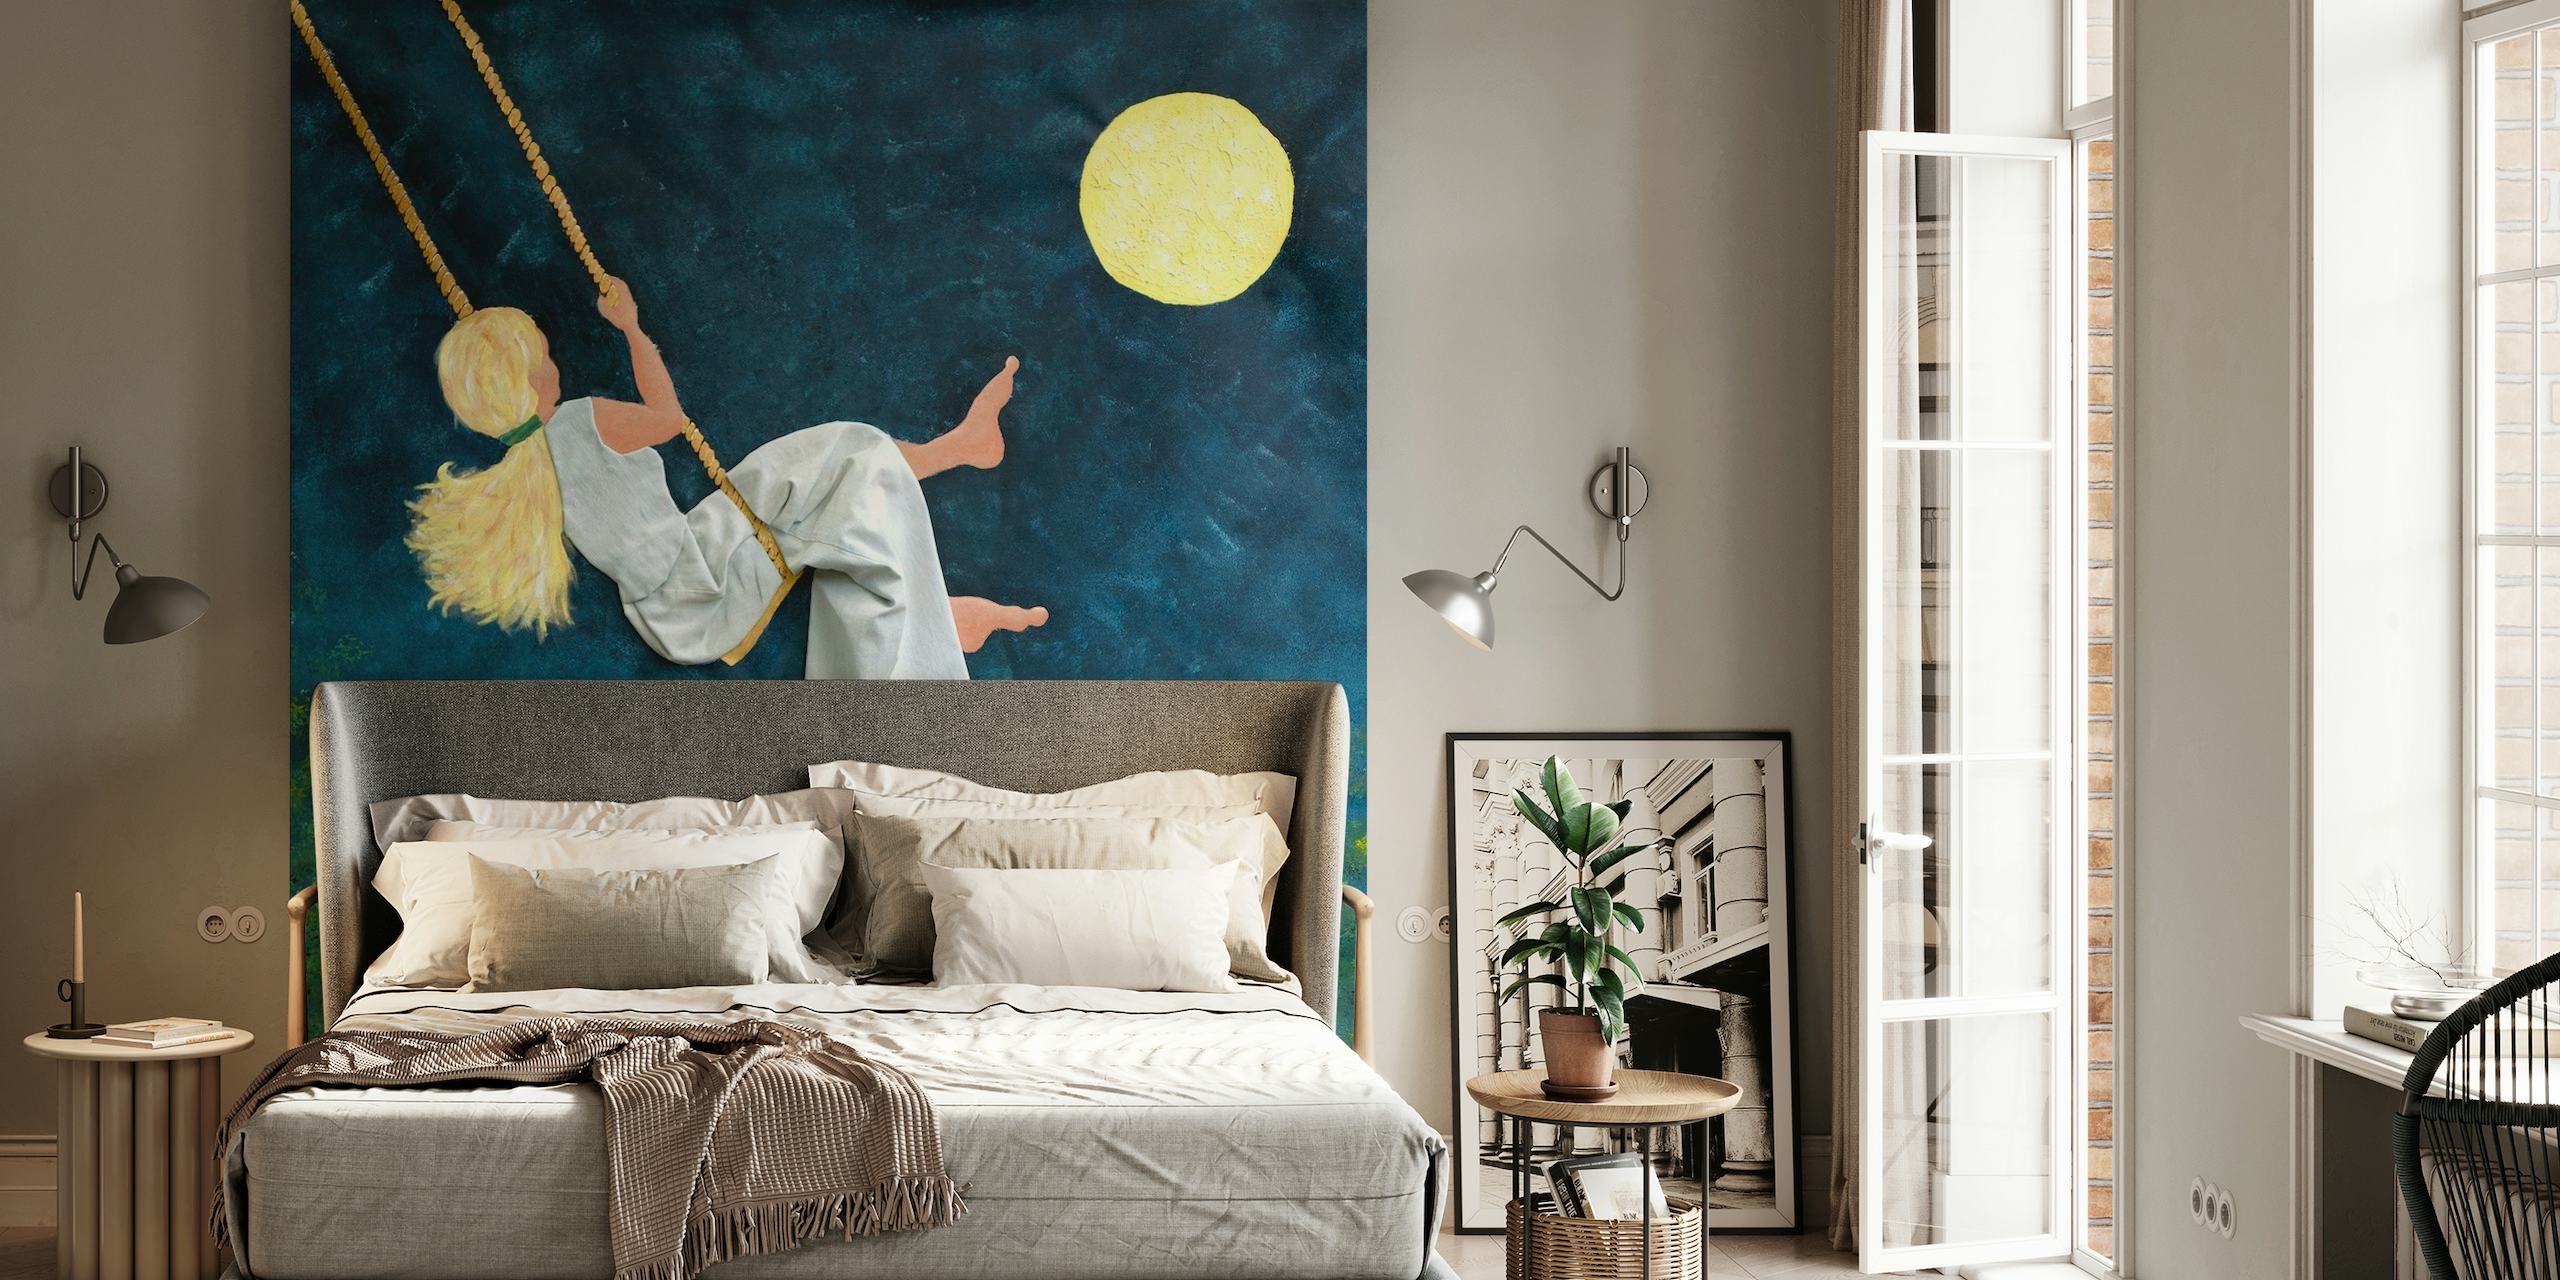 Girl swinging towards the moon on a starry night wall mural